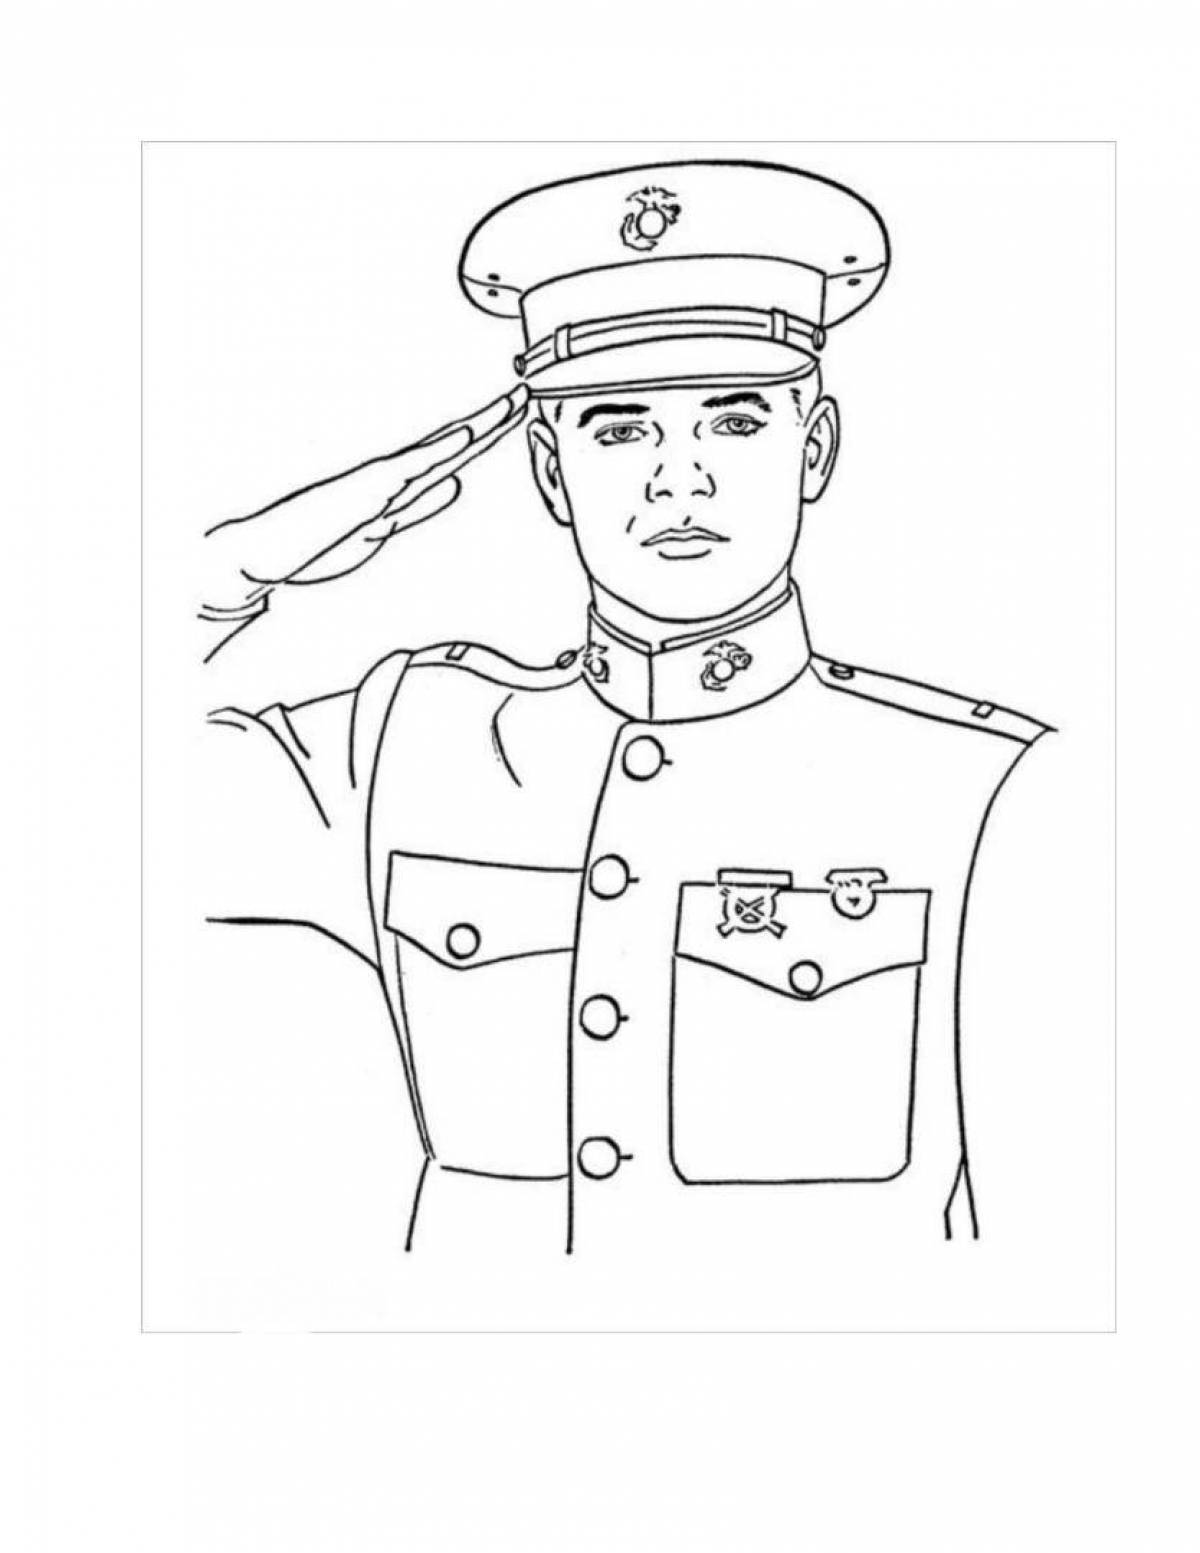 Intense soldier face coloring page